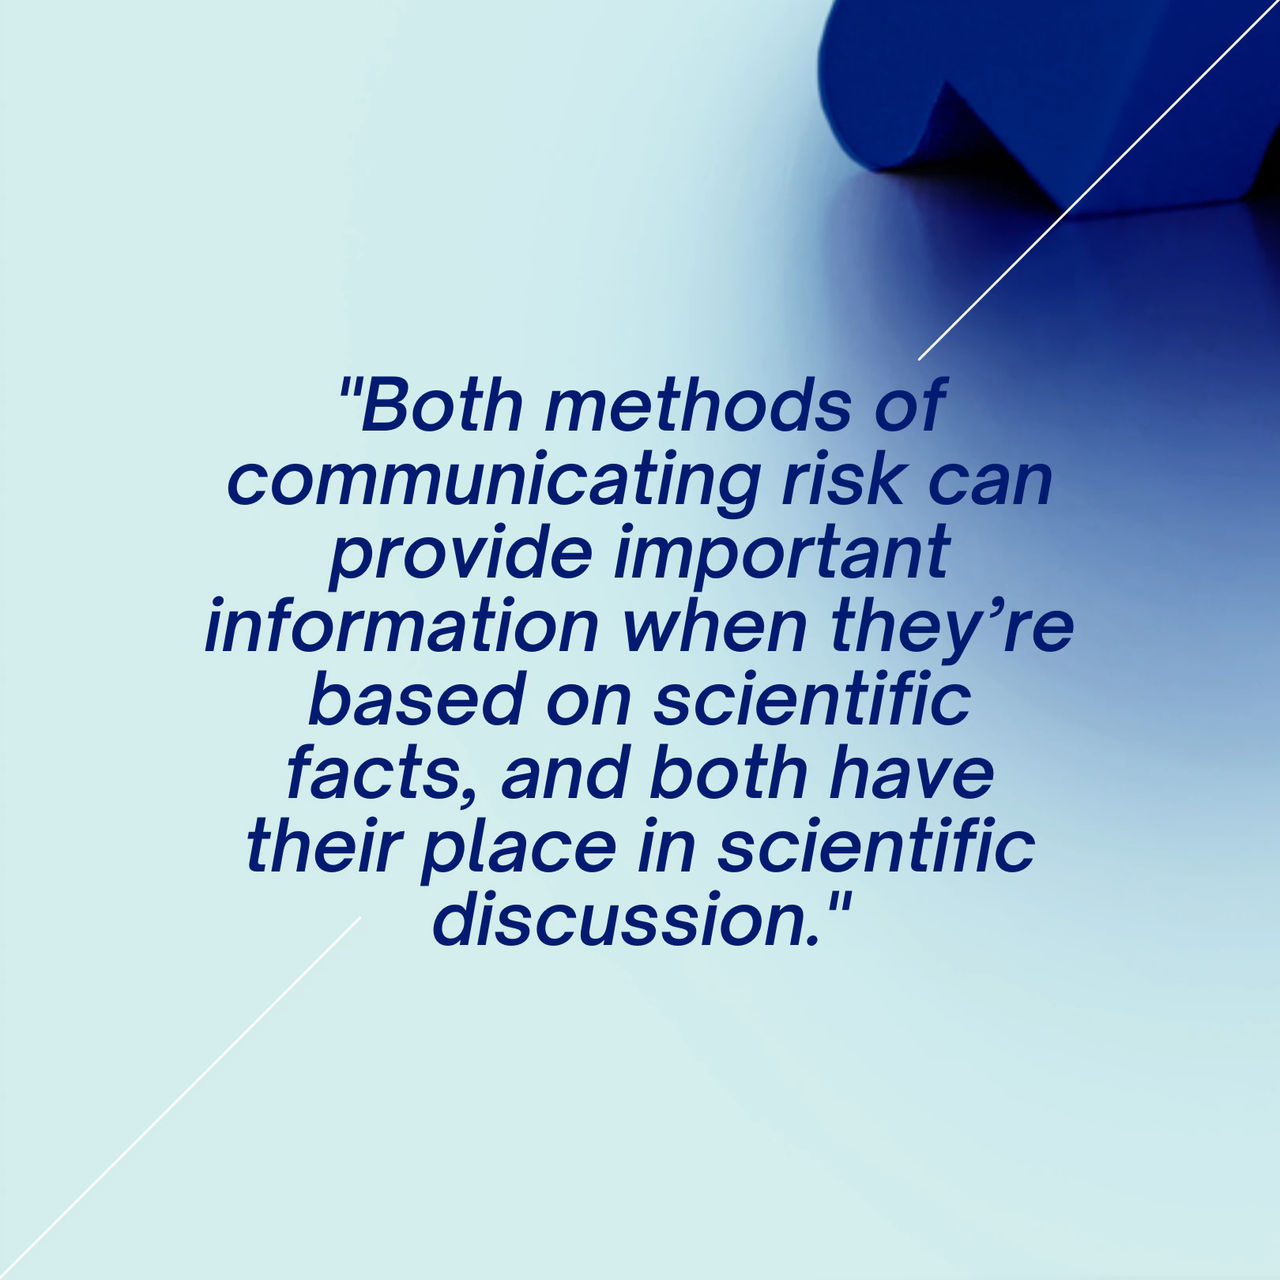 Both methods of communicating risk can provide important information when they're based on scientific facts, and both have their place in scientific discussion